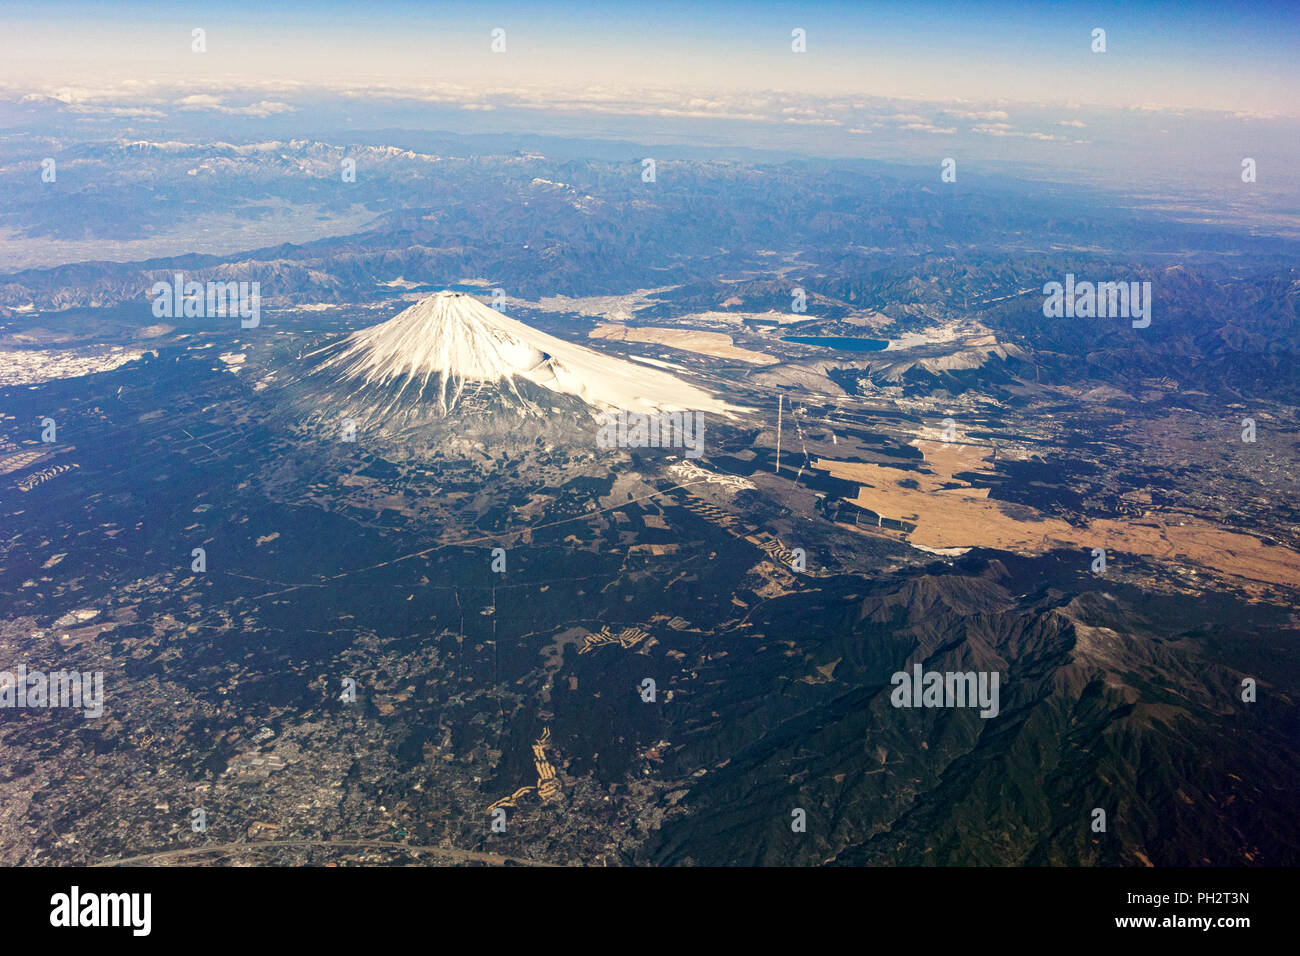 Mt Fuji seen from the air over Shizuoka Prefecture Japan on 02 Feb 2015 ...